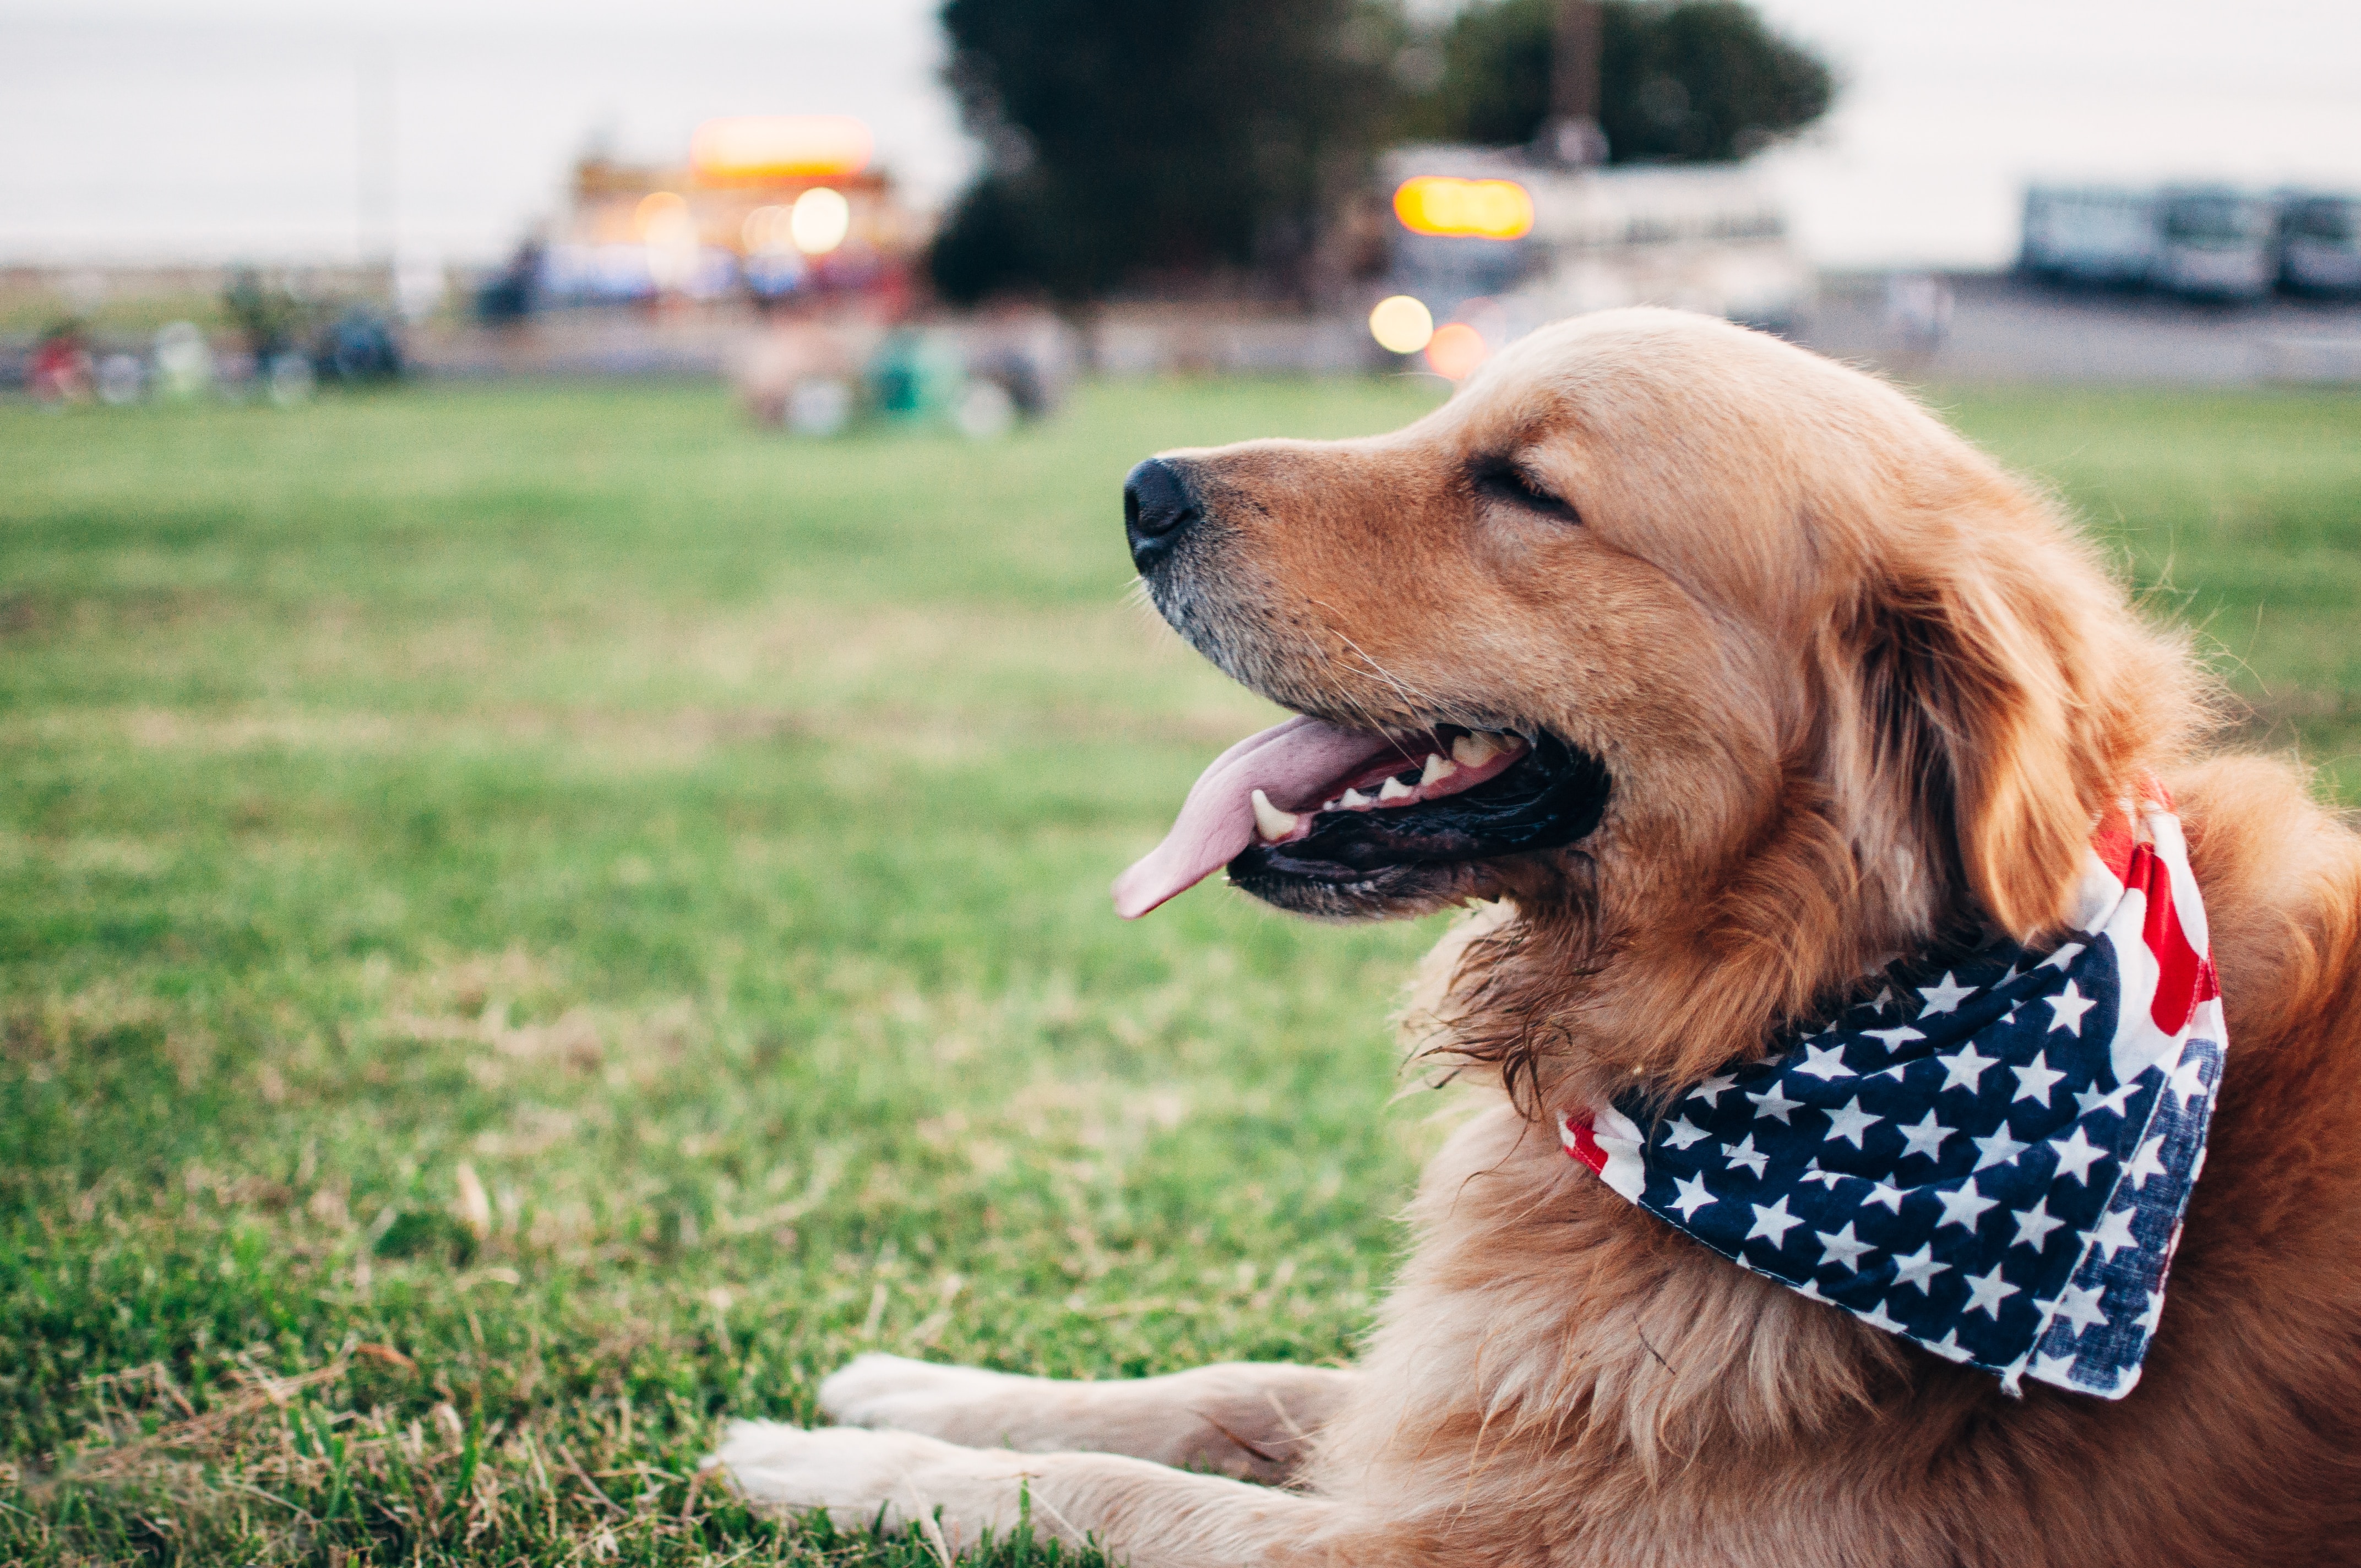 Is Golden Retriever Adoption Right for You?